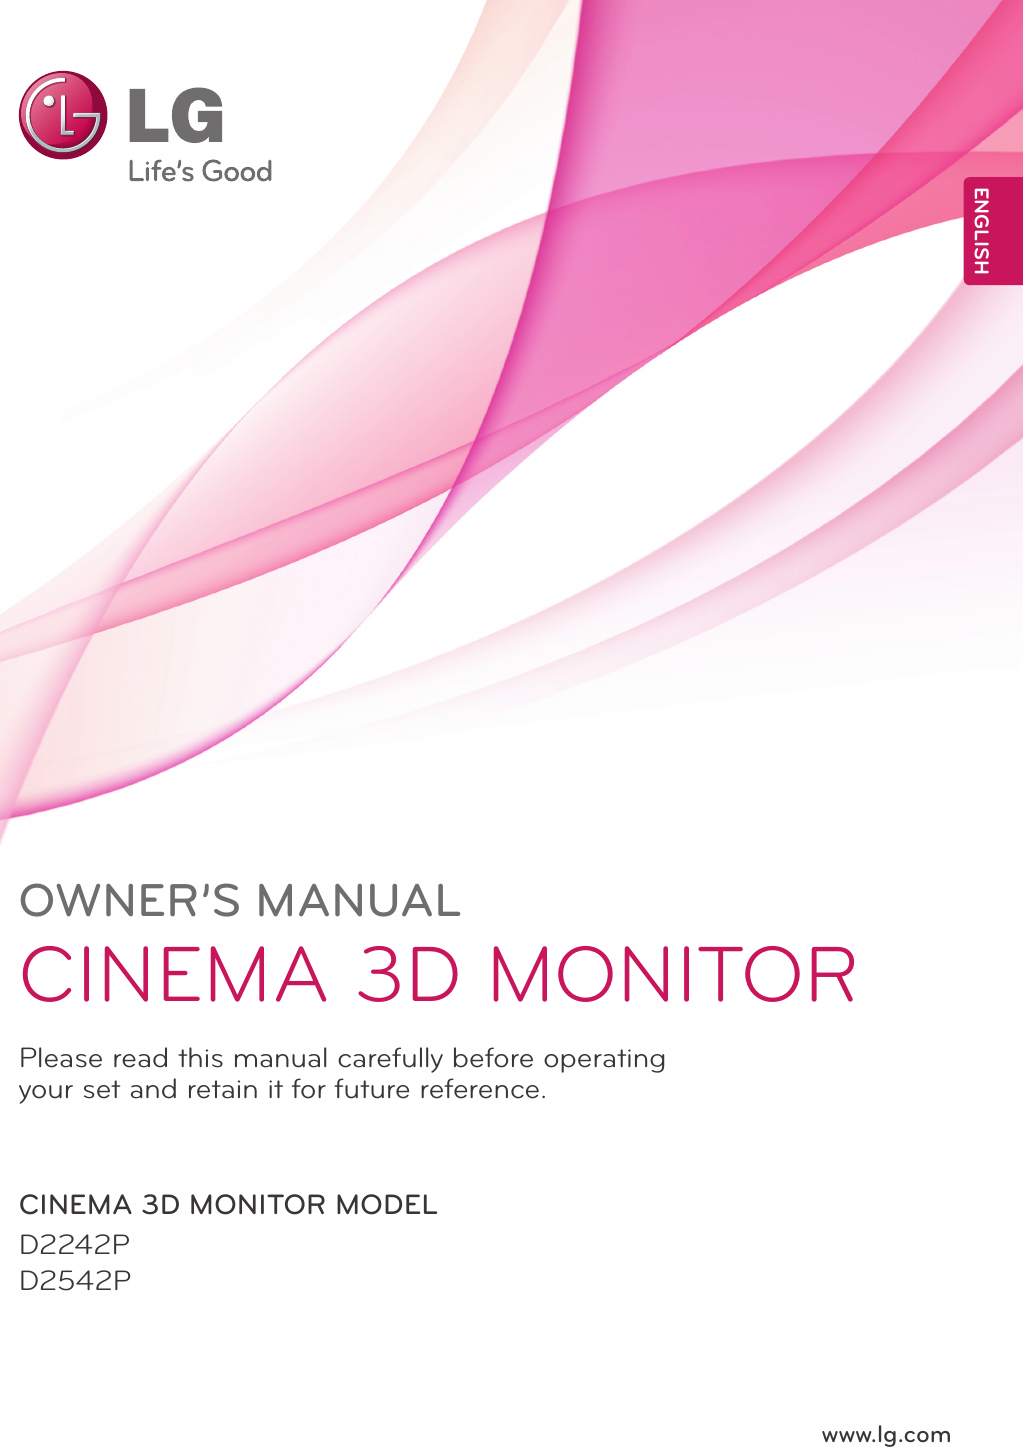 www.lg.comOWNER’S MANUALCINEMA 3D MONITORD2242P D2542PPlease read this manual carefully before operating your set and retain it for future reference.CINEMA 3D MONITOR MODELENGLISH